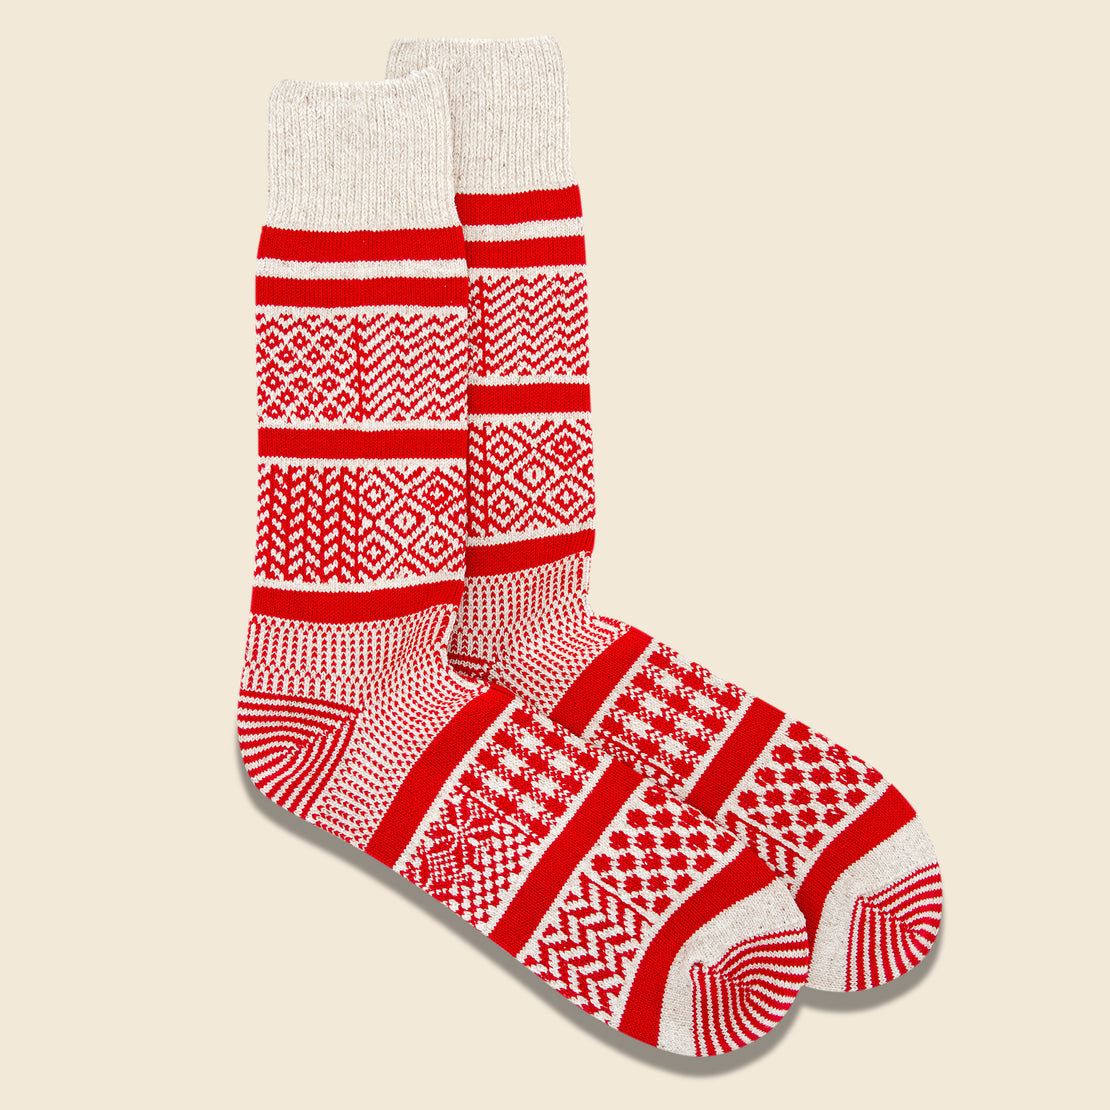 Multi Jacquard Sock - Ivory/Red - RoToTo - STAG Provisions - Accessories - Socks